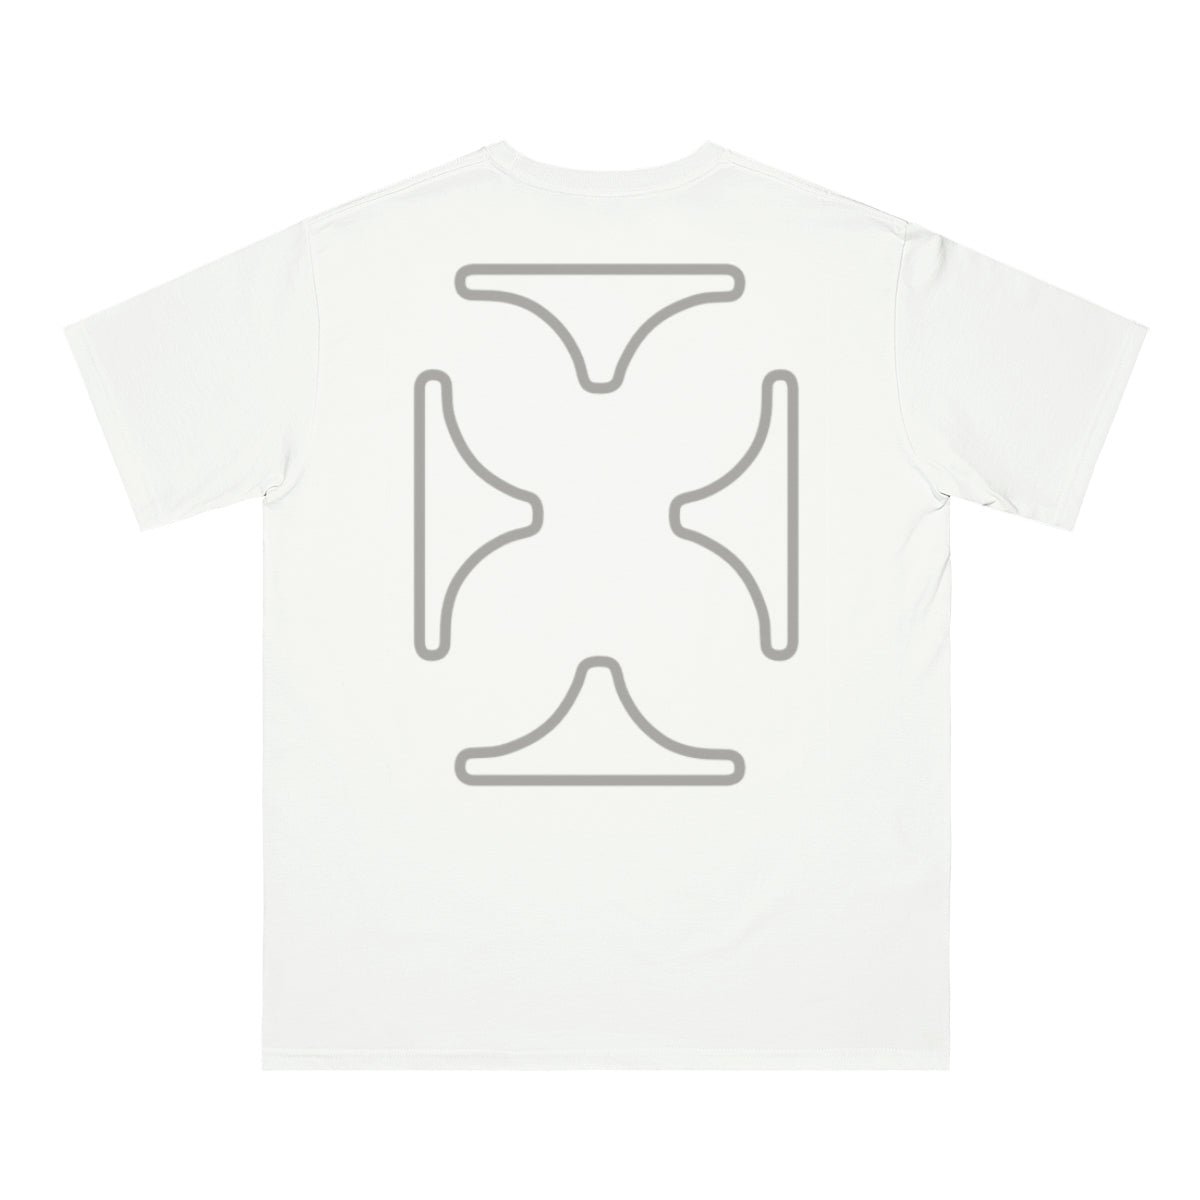 Mens White and Grey Graphic T Shirt